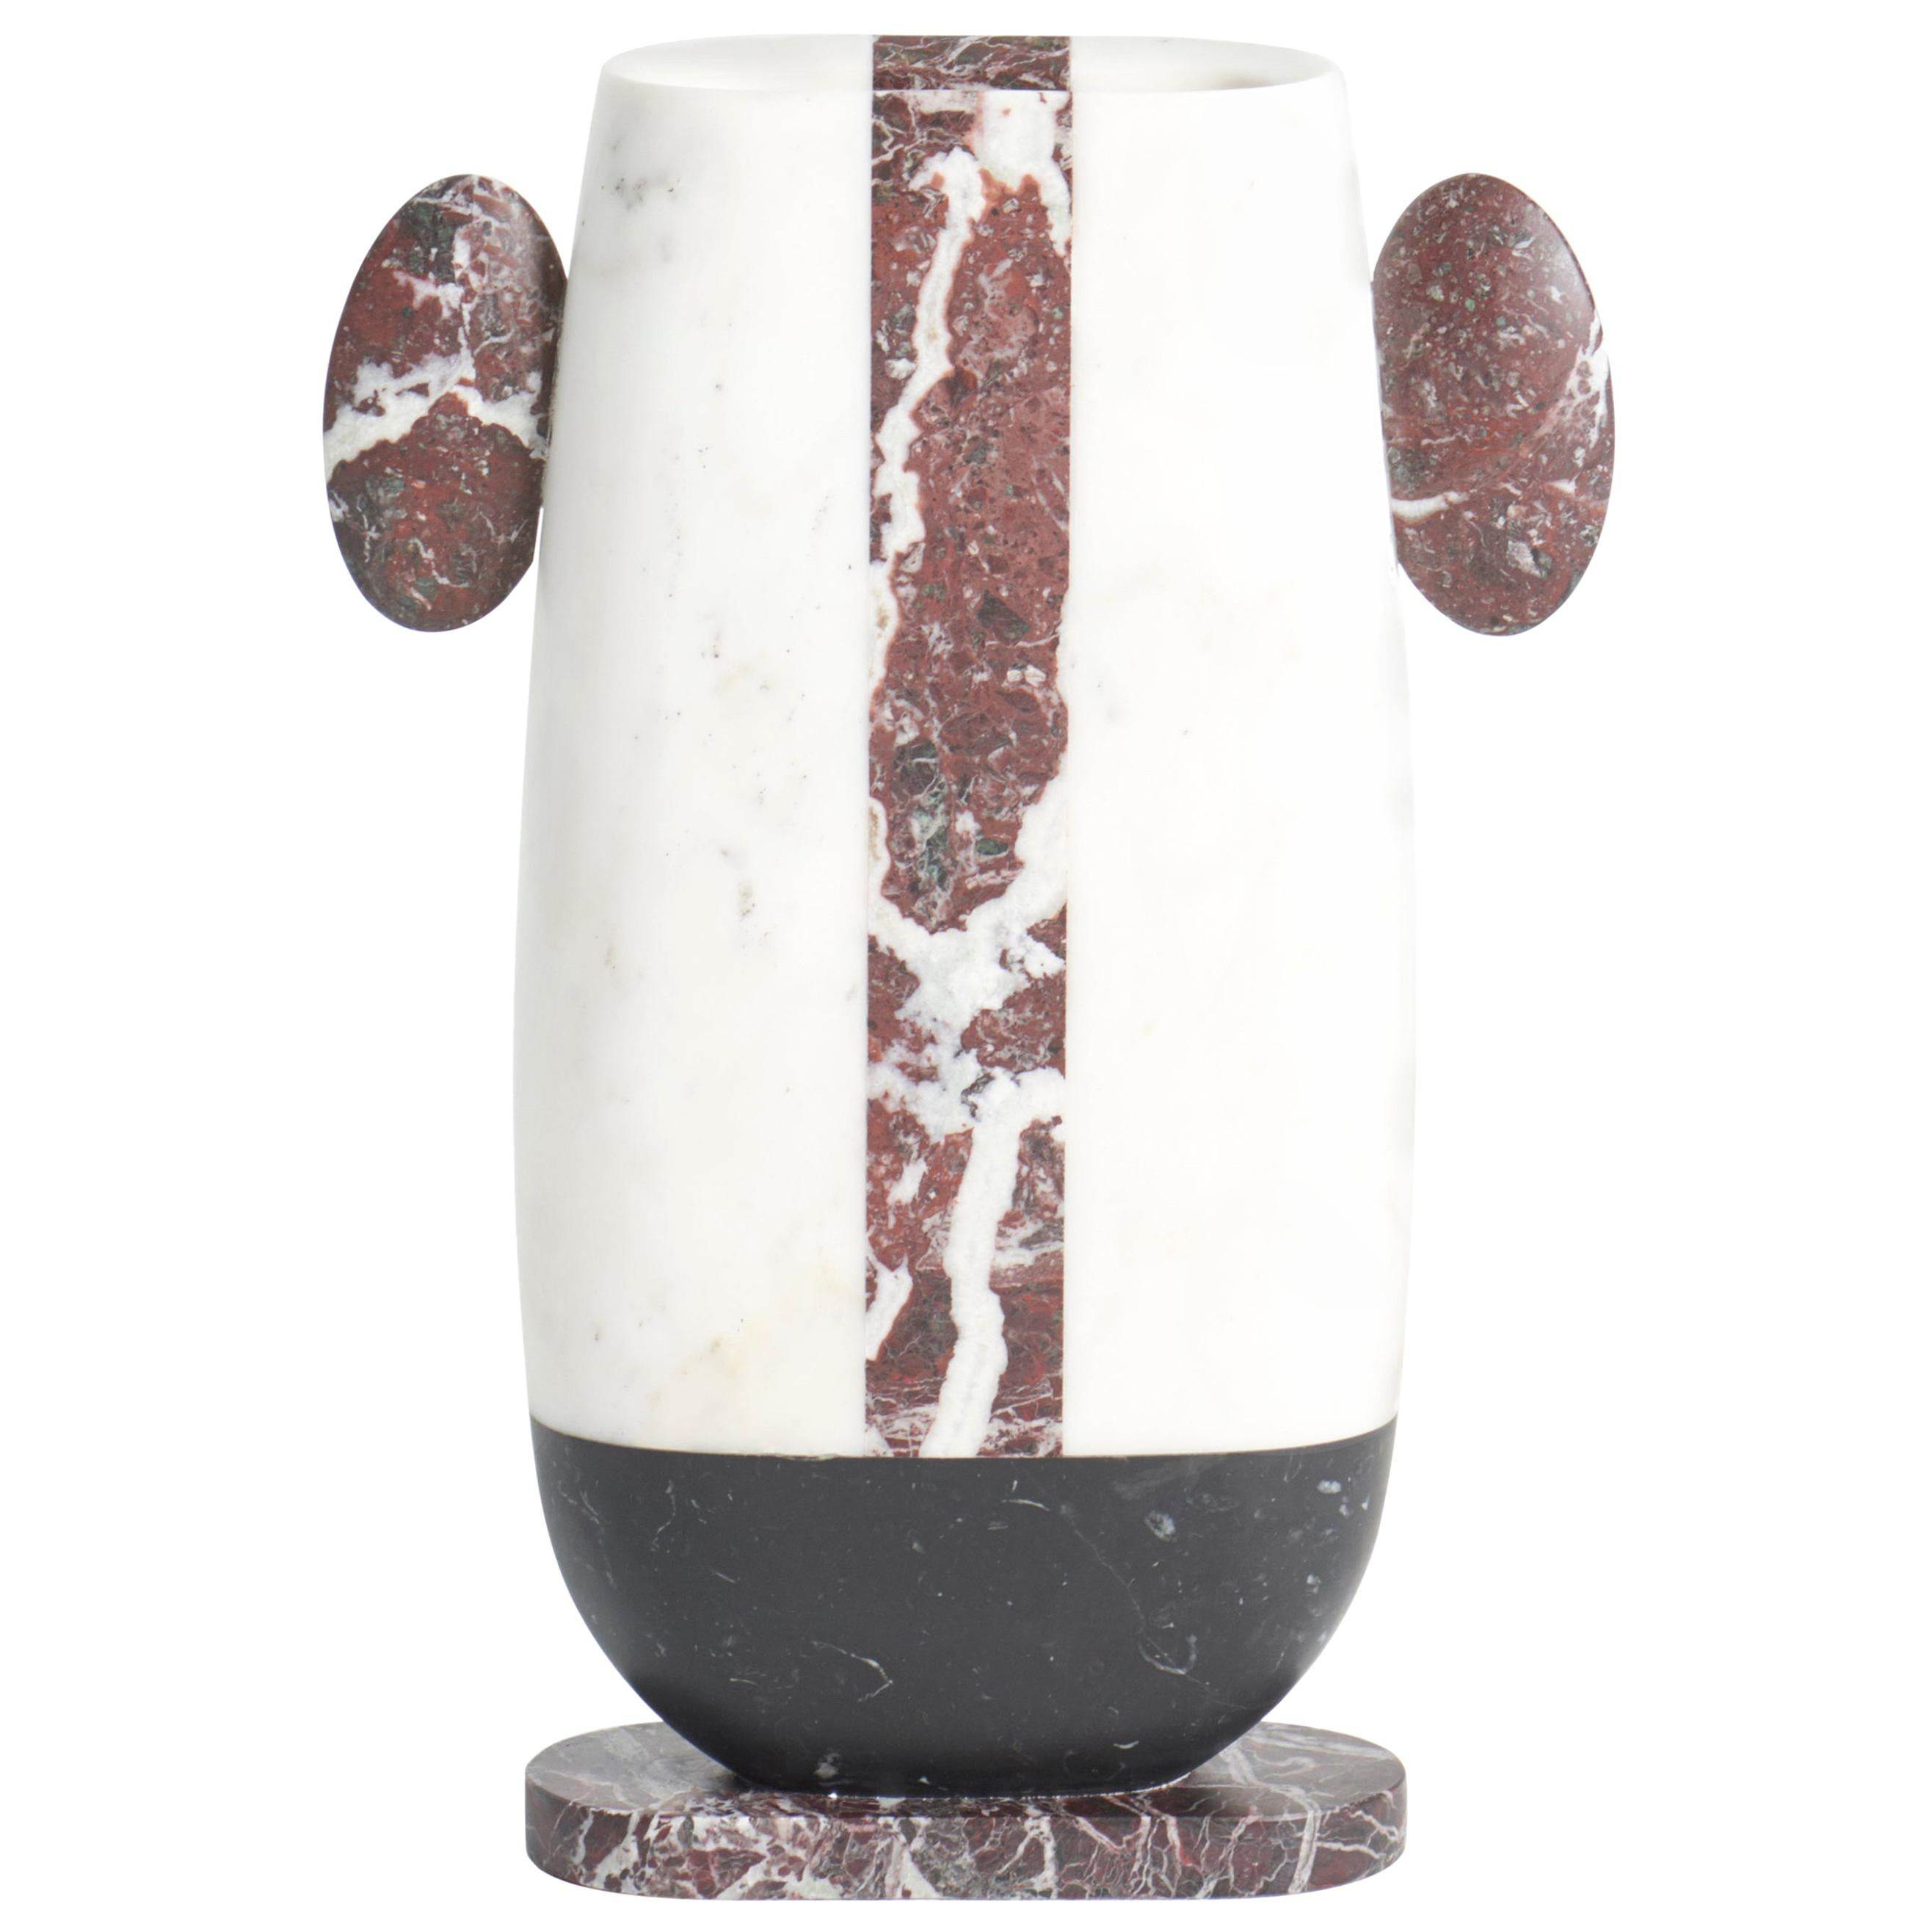 New Modern Vase in White, Black and Red Marbles, creator Matteo Cibic Stock